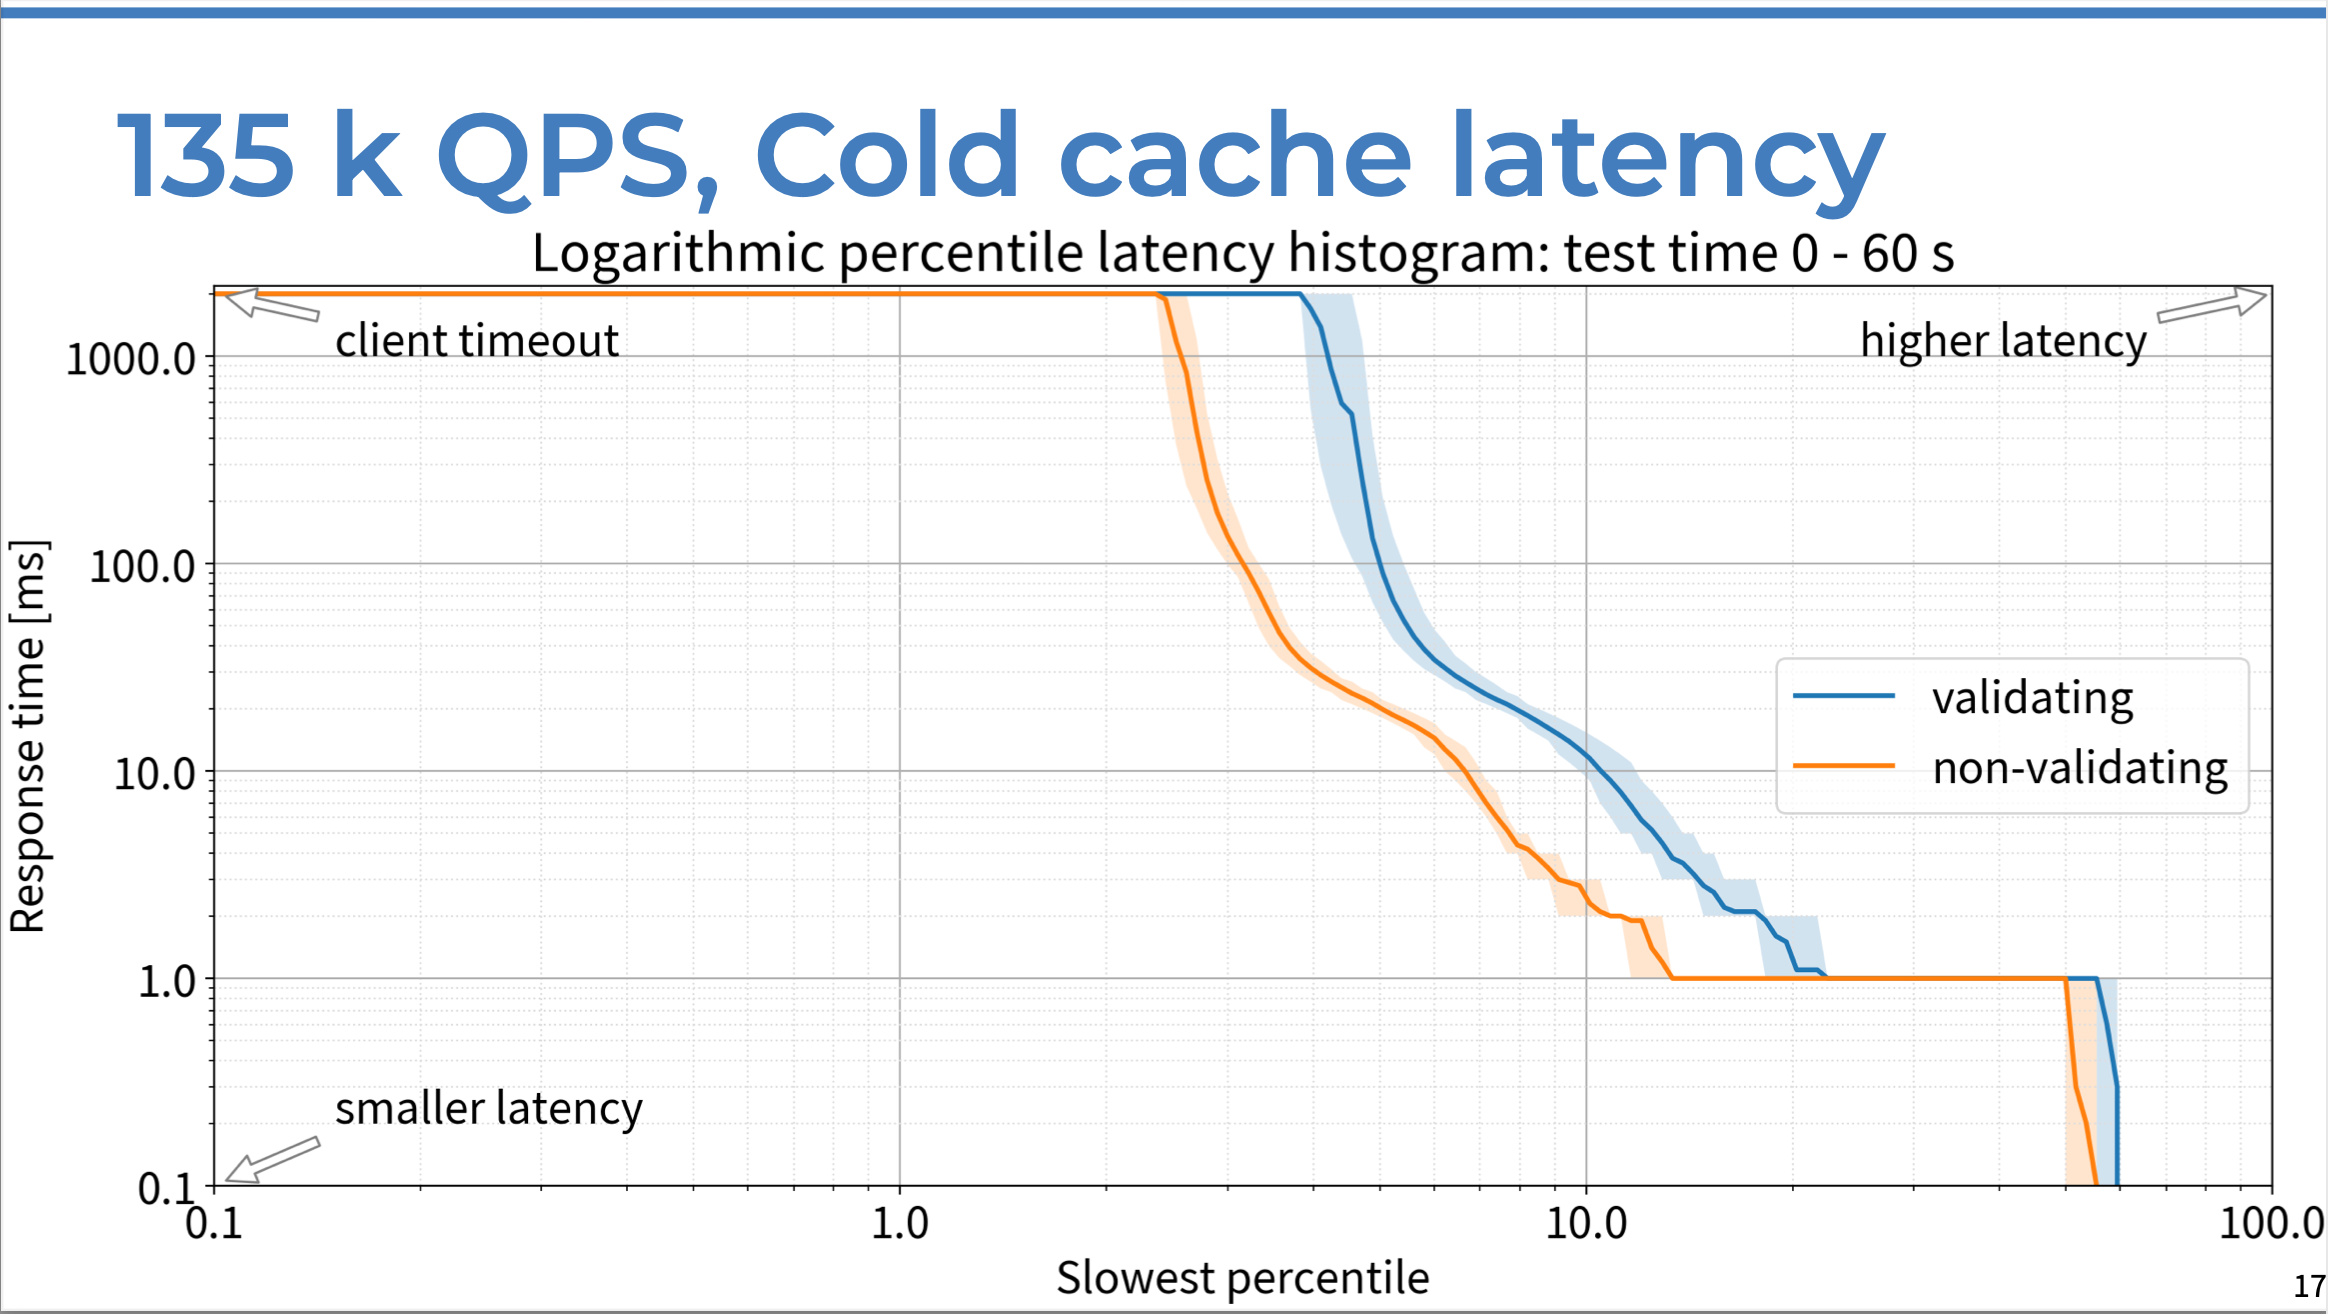 Logorithmic percentile latency histogram of response time (in ms) vs. slowest percentile of responses, comparing DNSSEC-validating resolver response to non-validating server response with 135K QPS and a cold cache.